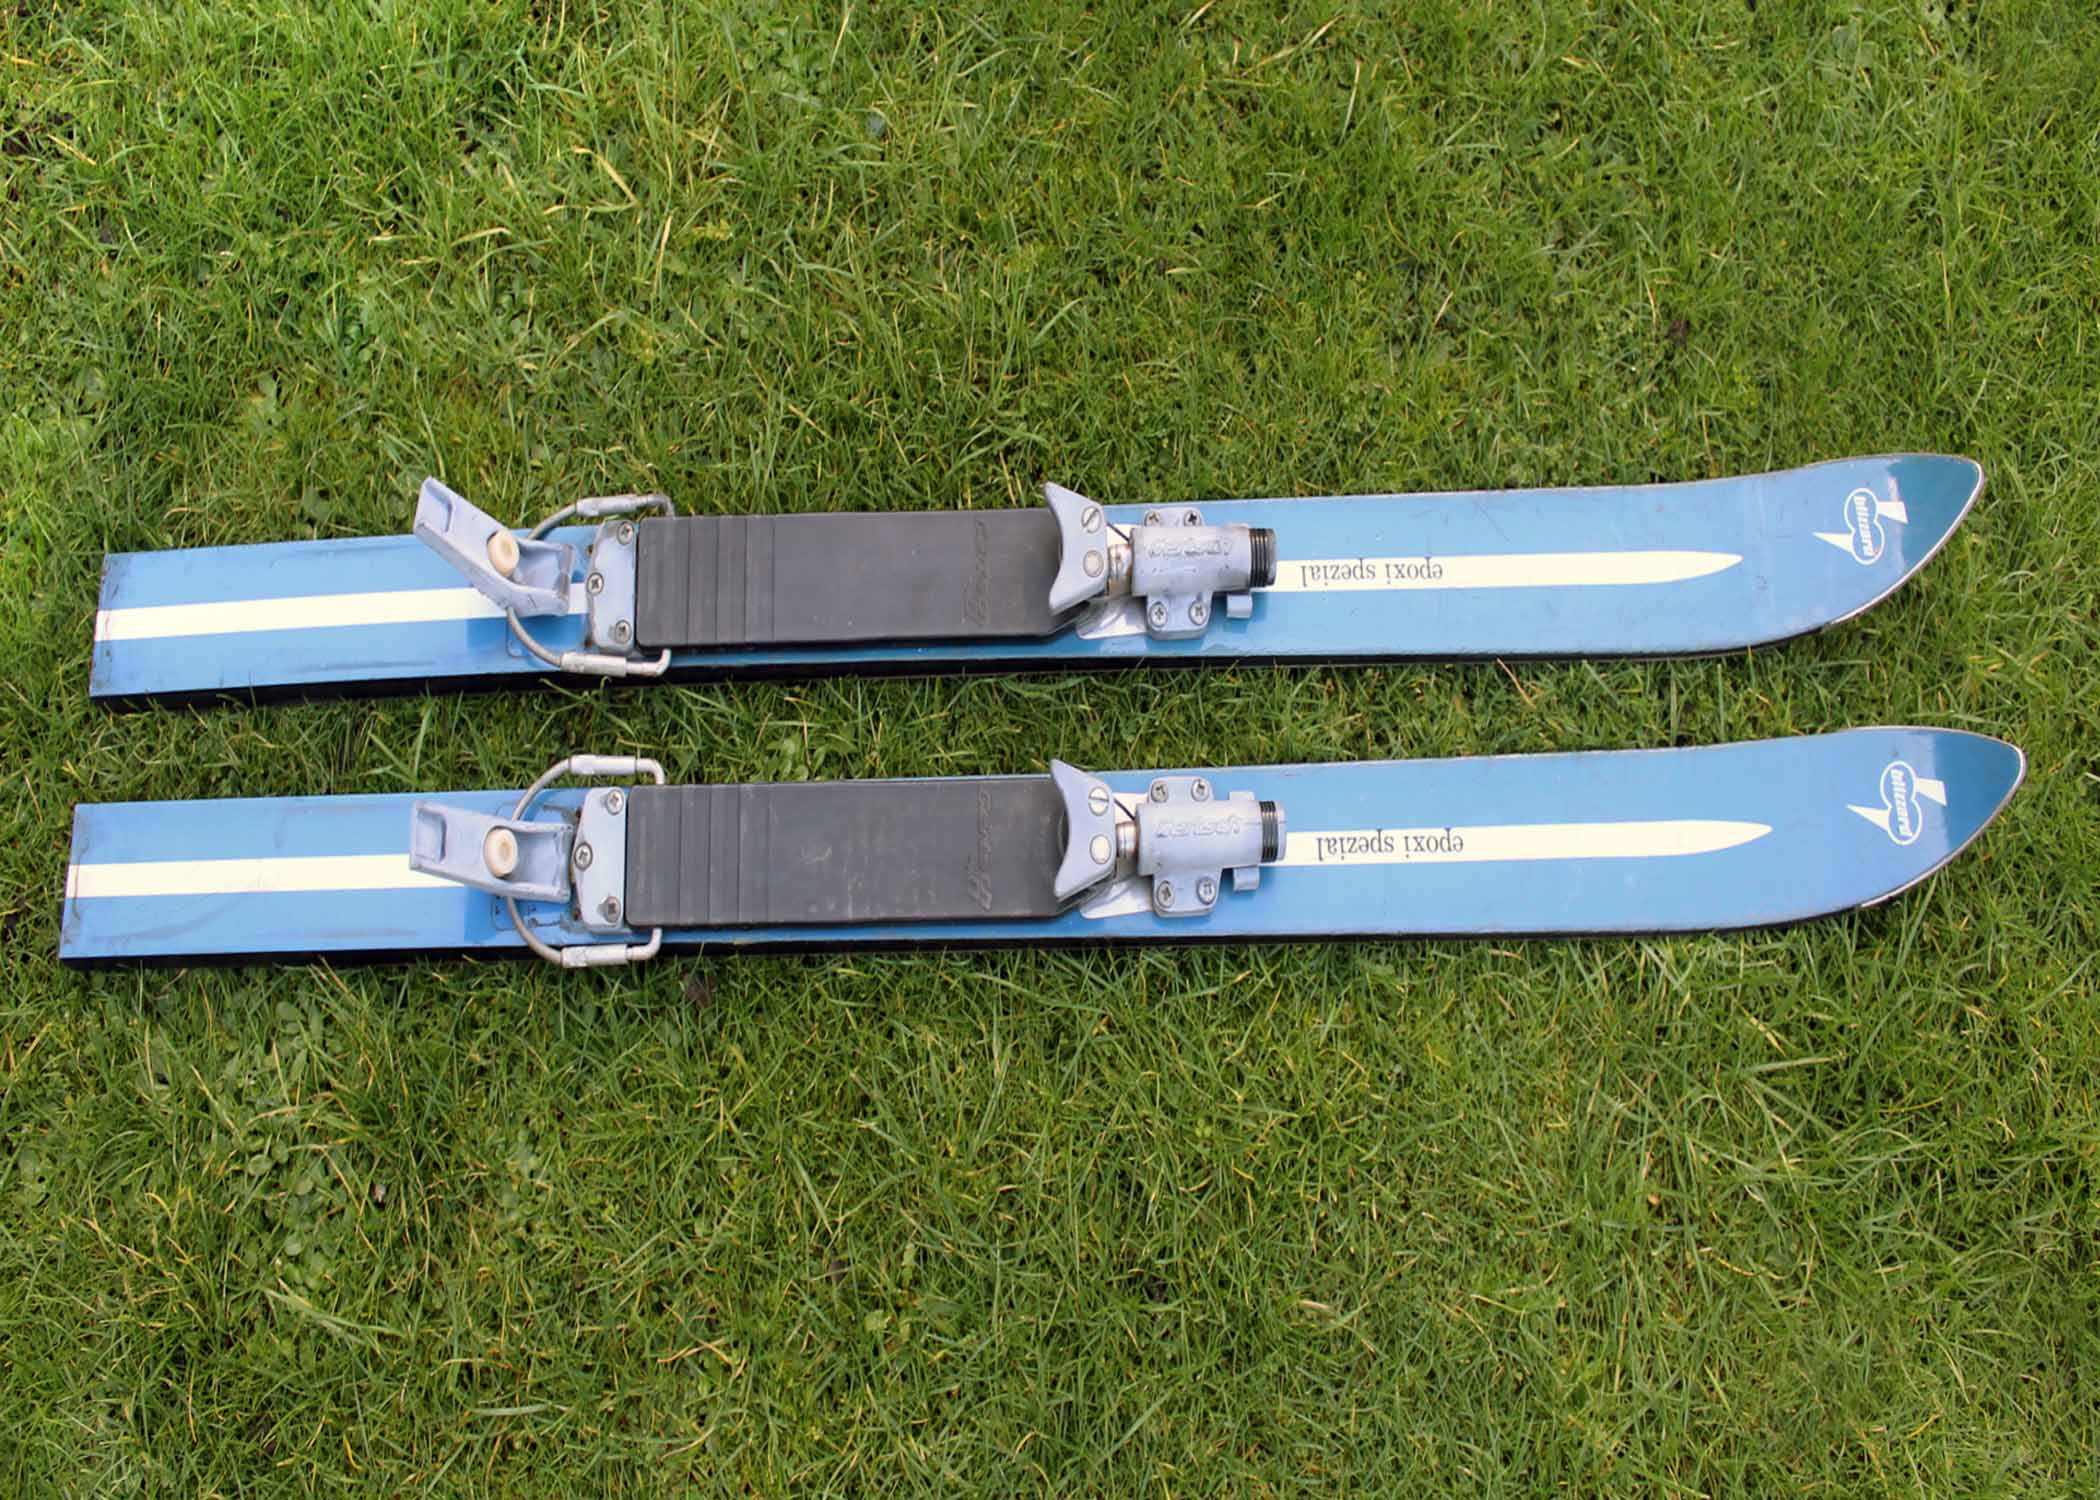 1973 blue coloured Blizzard skis shortened by about 50%, pictured on grass